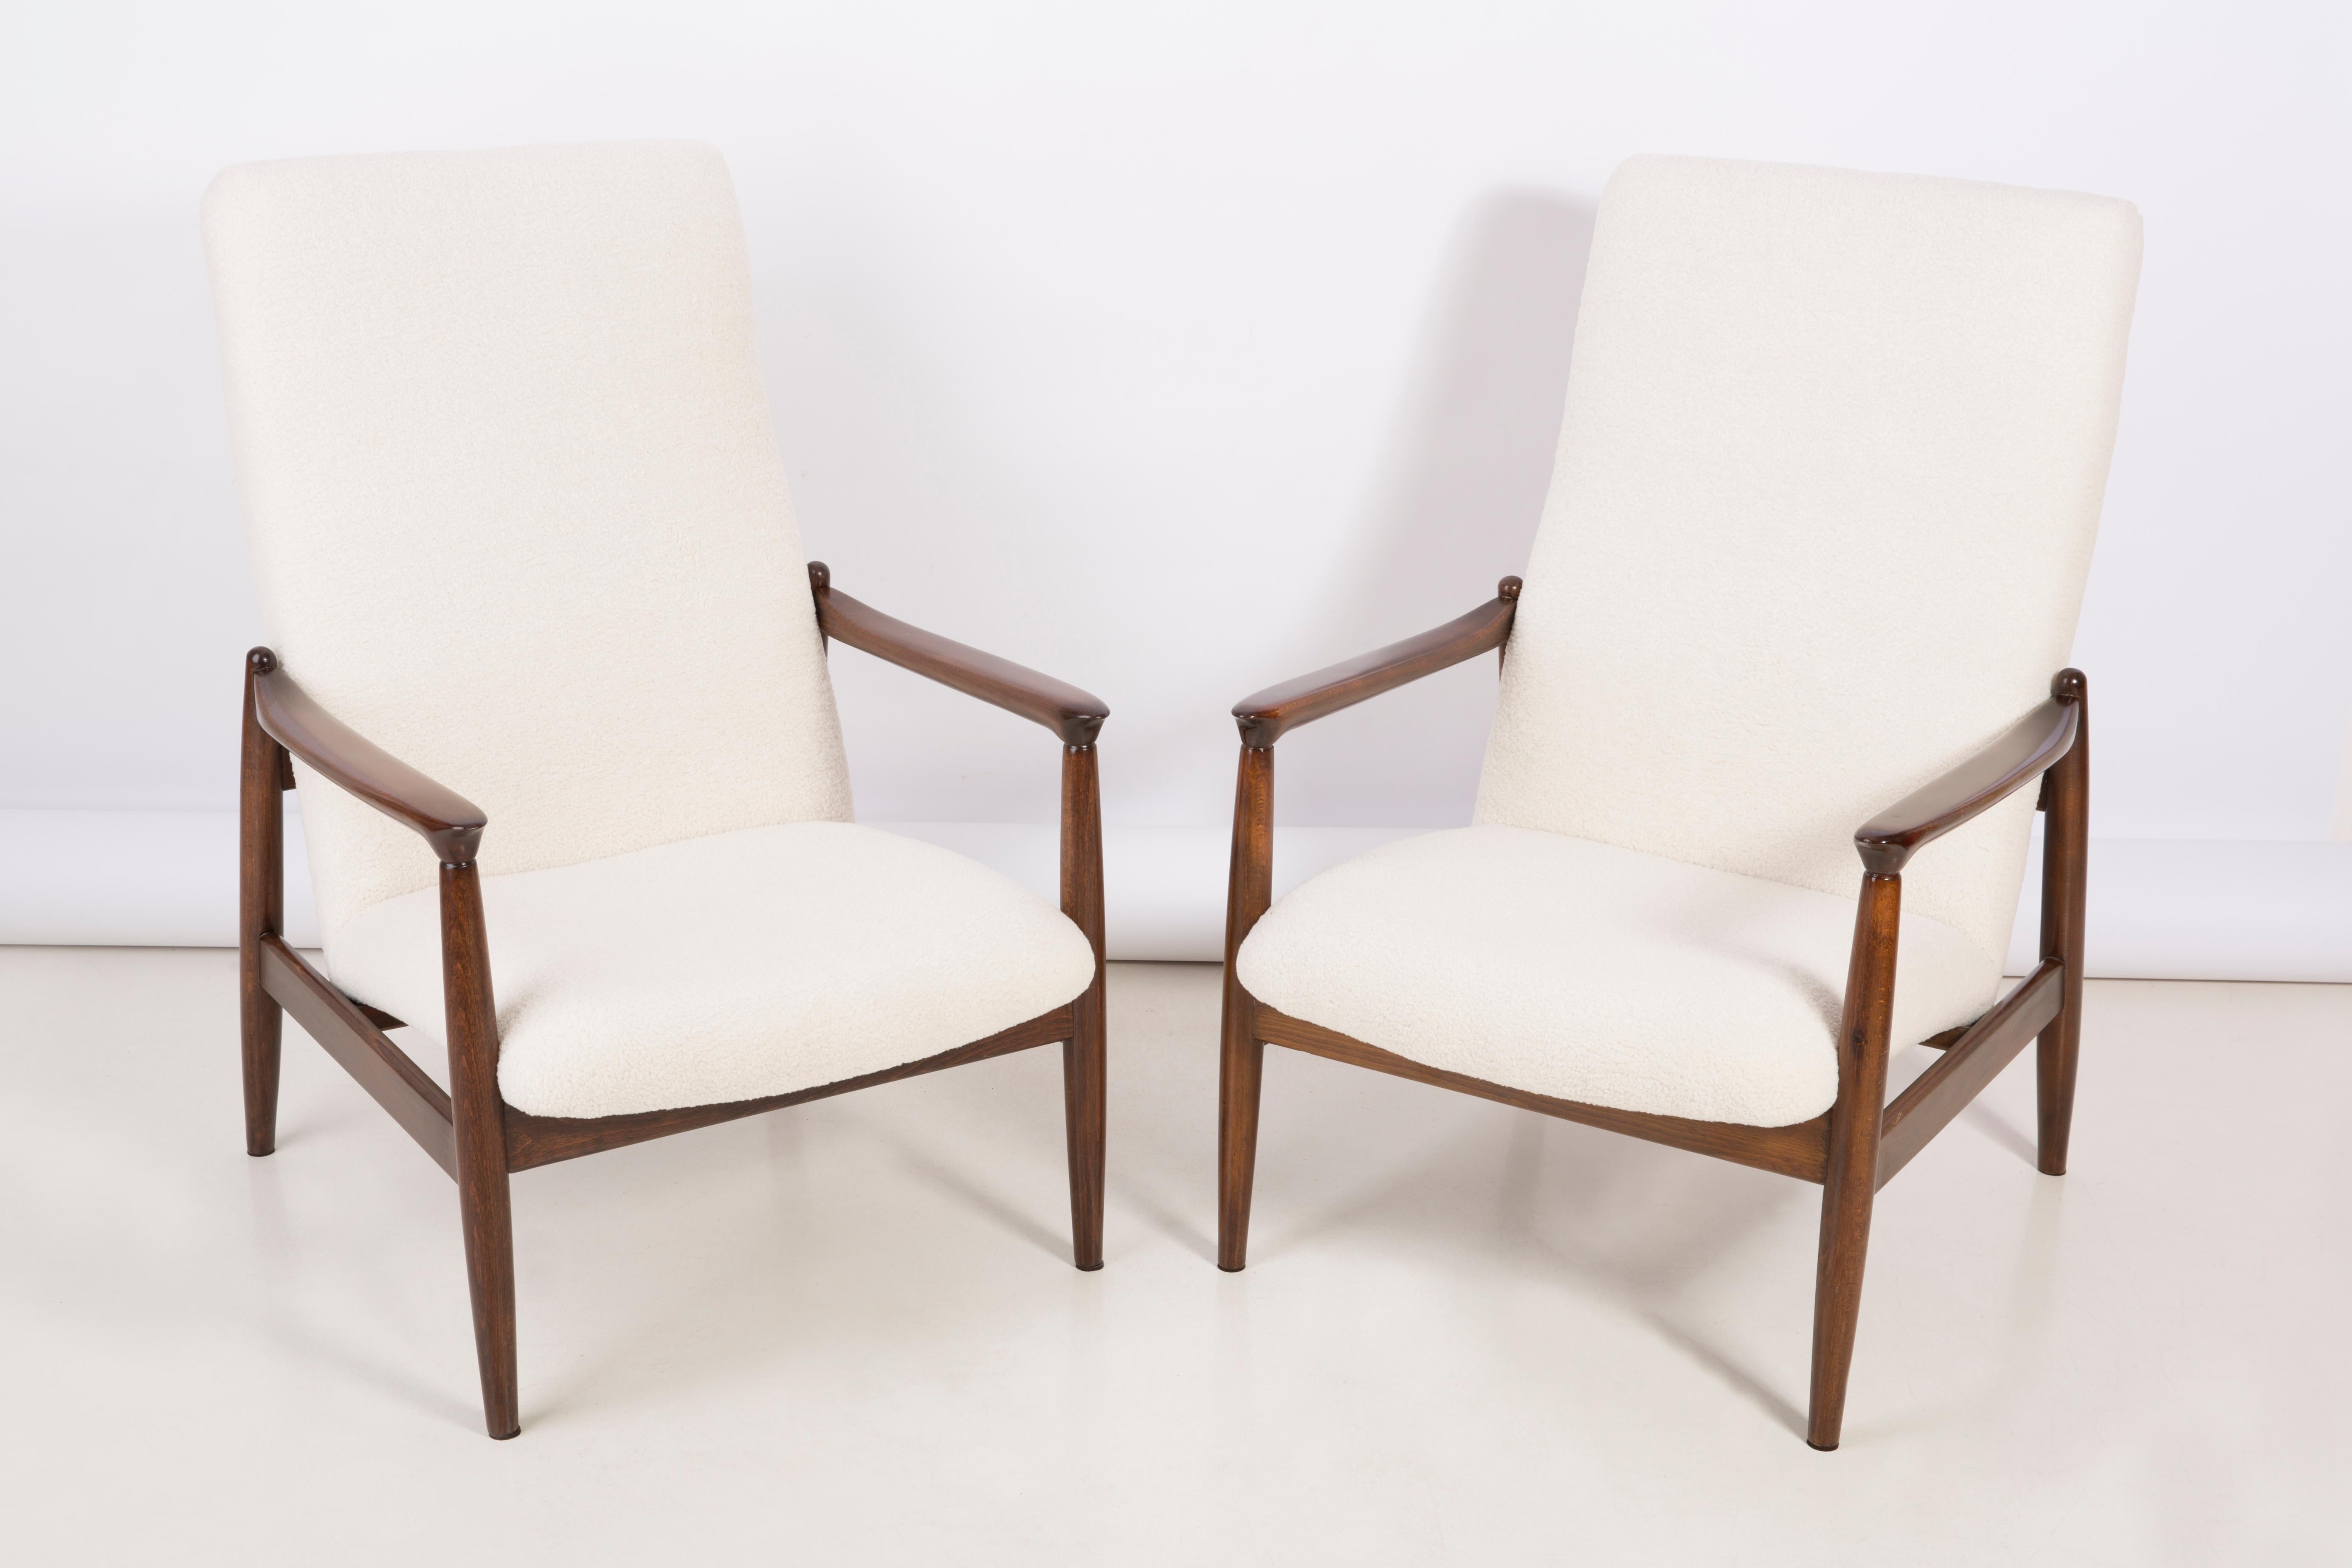 Set of light crème bouclé armchairs and stools, designed by Edmund Homa, a Polish architect, designer of Industrial Design and interior architecture, professor at the Academy of Fine Arts in Gdansk.

The armchairs were made in the 1960s in the